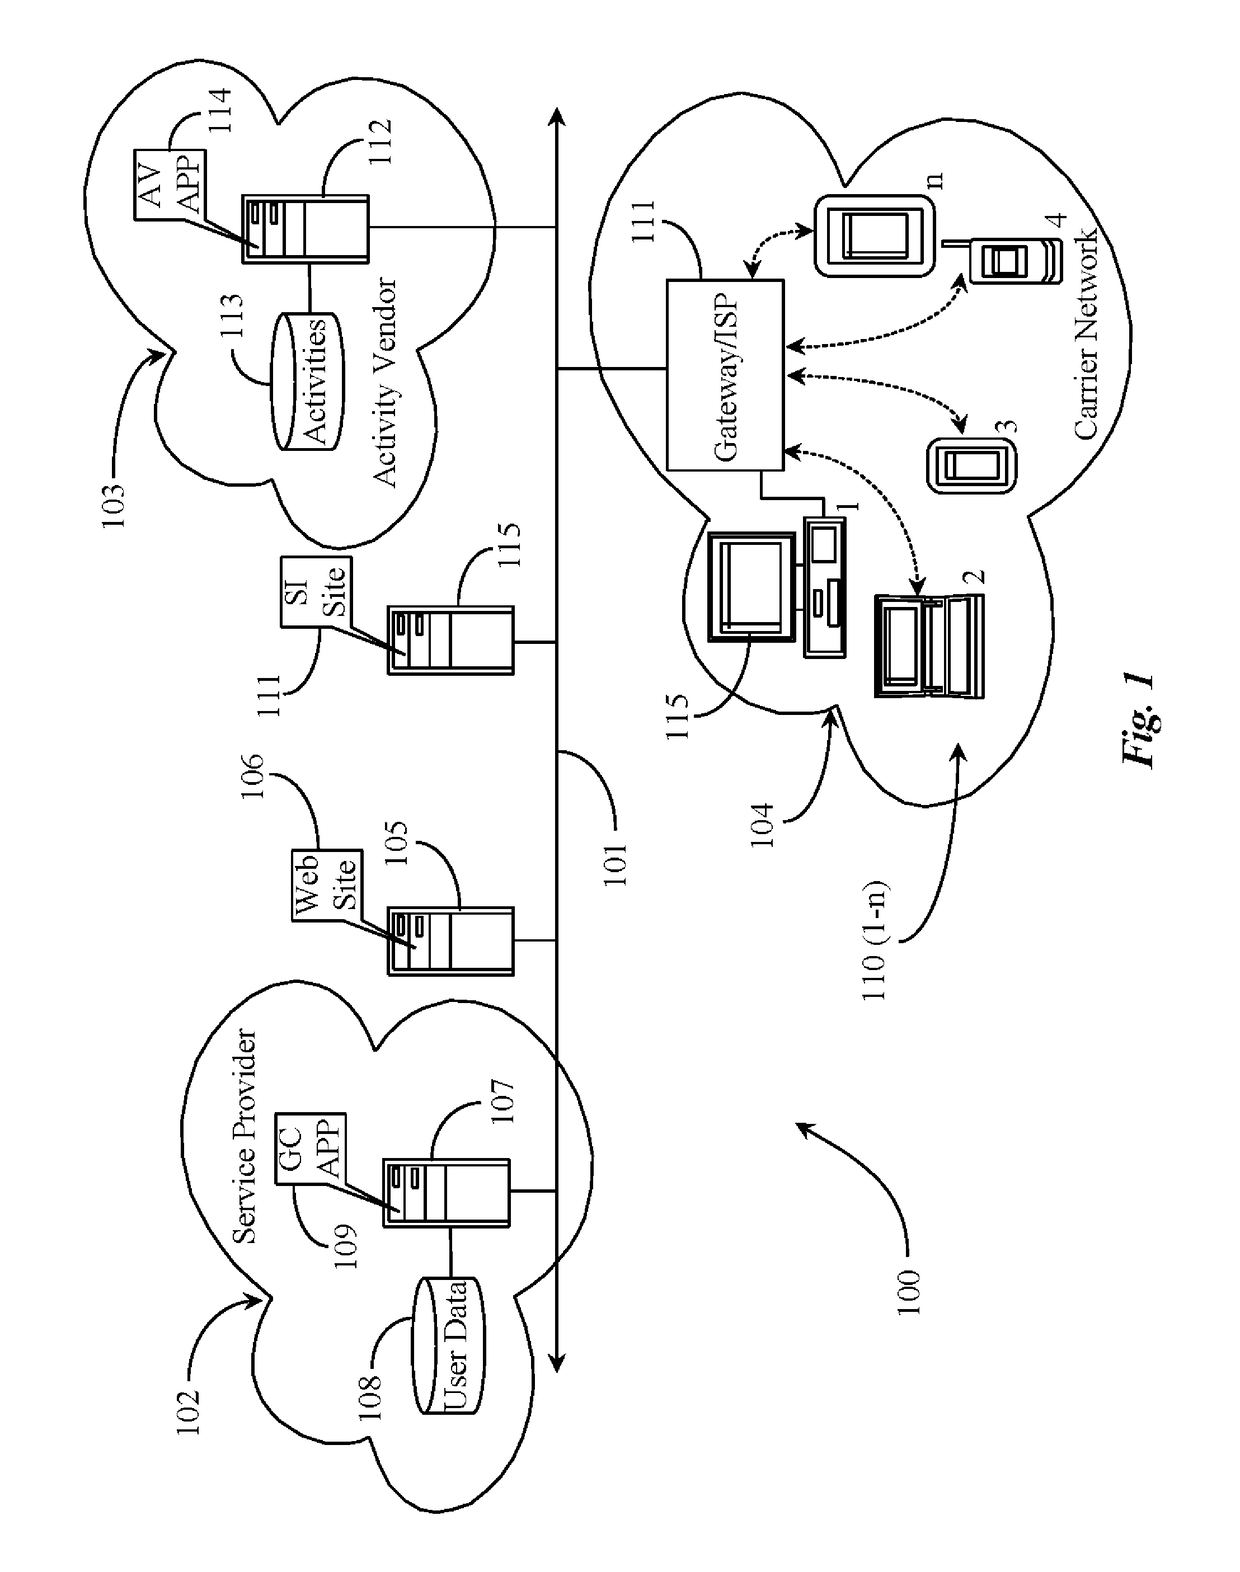 Systems and methods for managing group activities over a data network